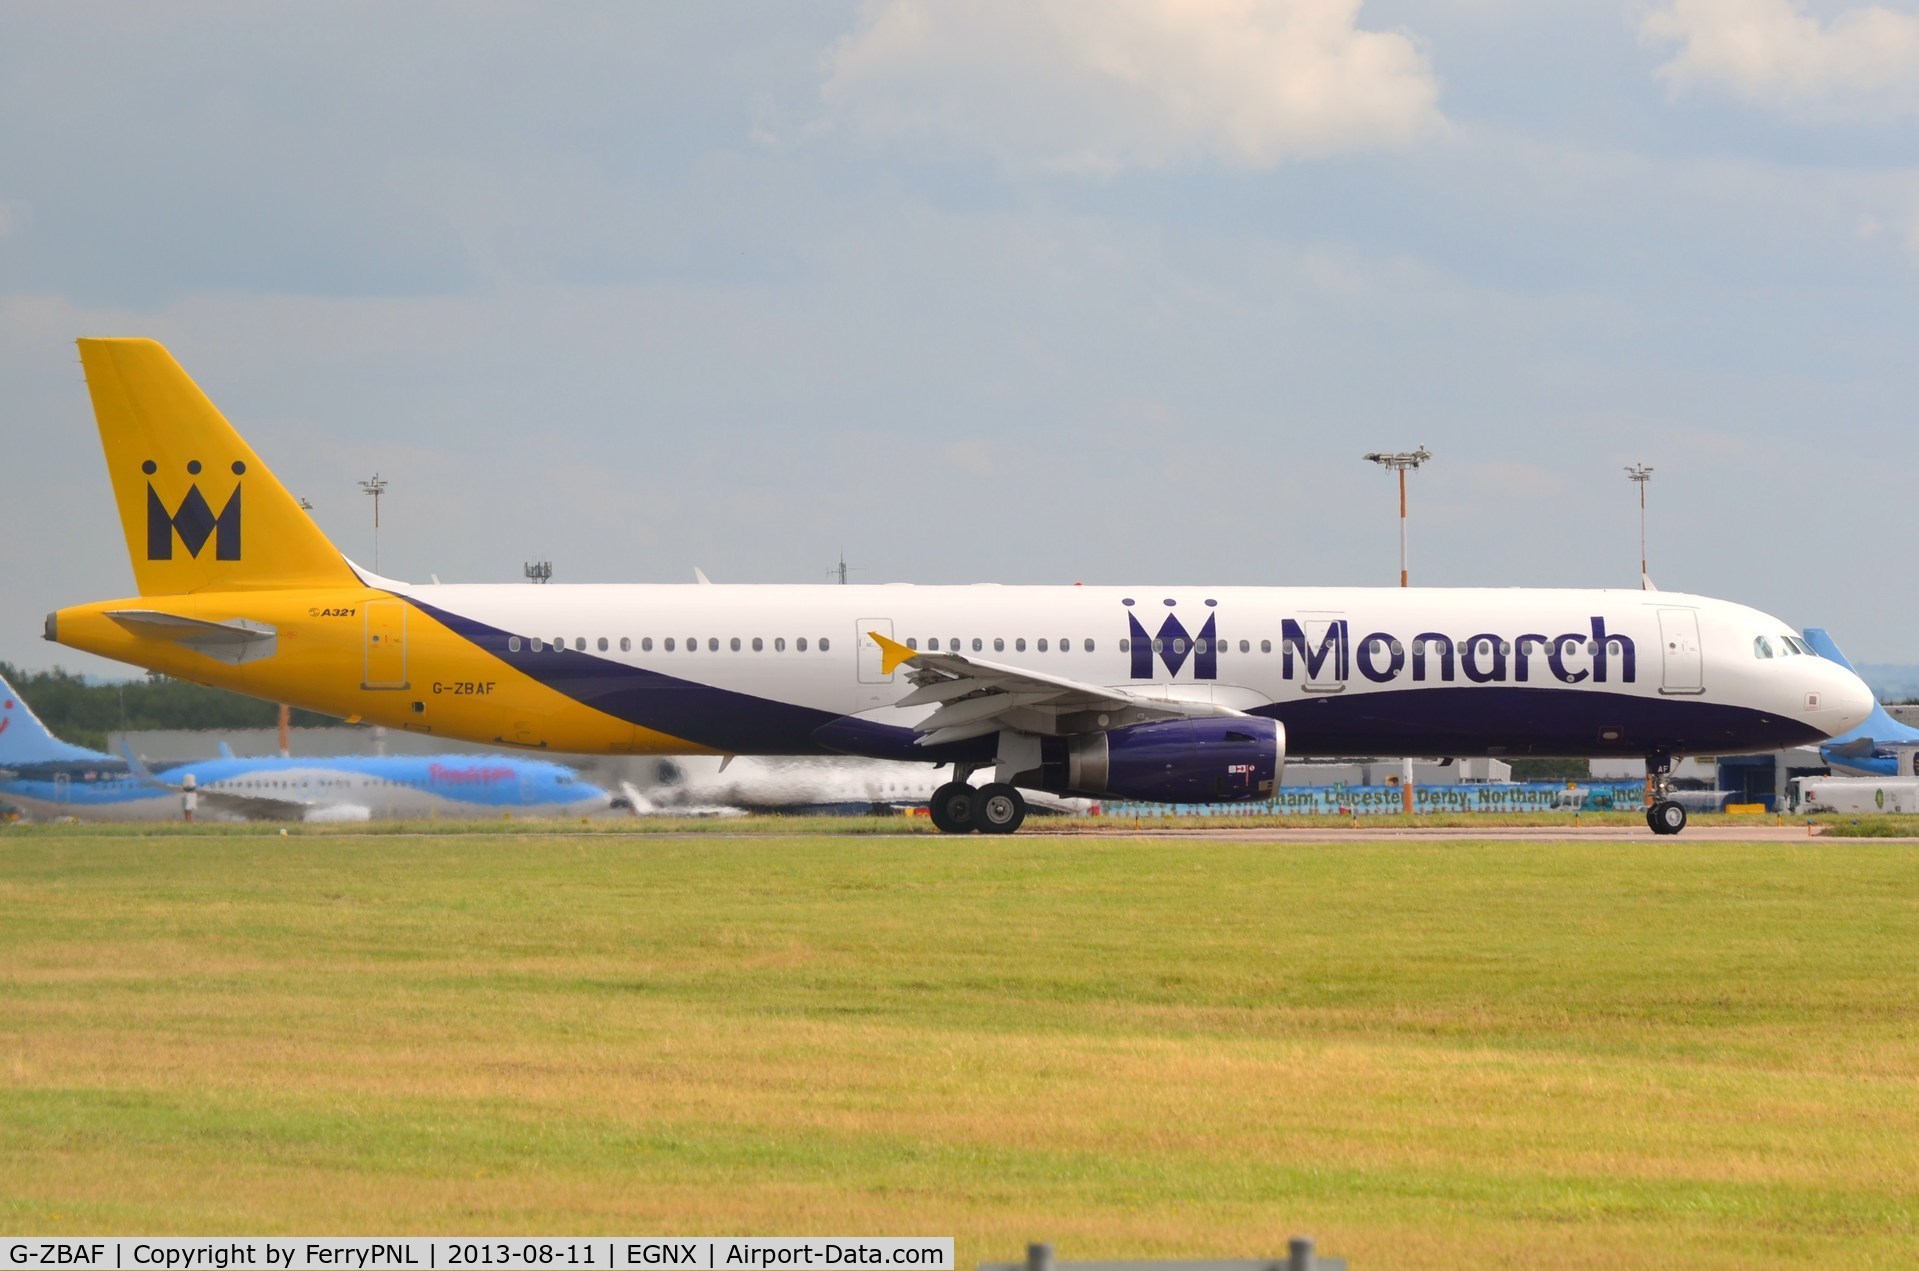 G-ZBAF, 2006 Airbus A321-231 C/N 2730, Monarch A321 vacating the runway in EMA